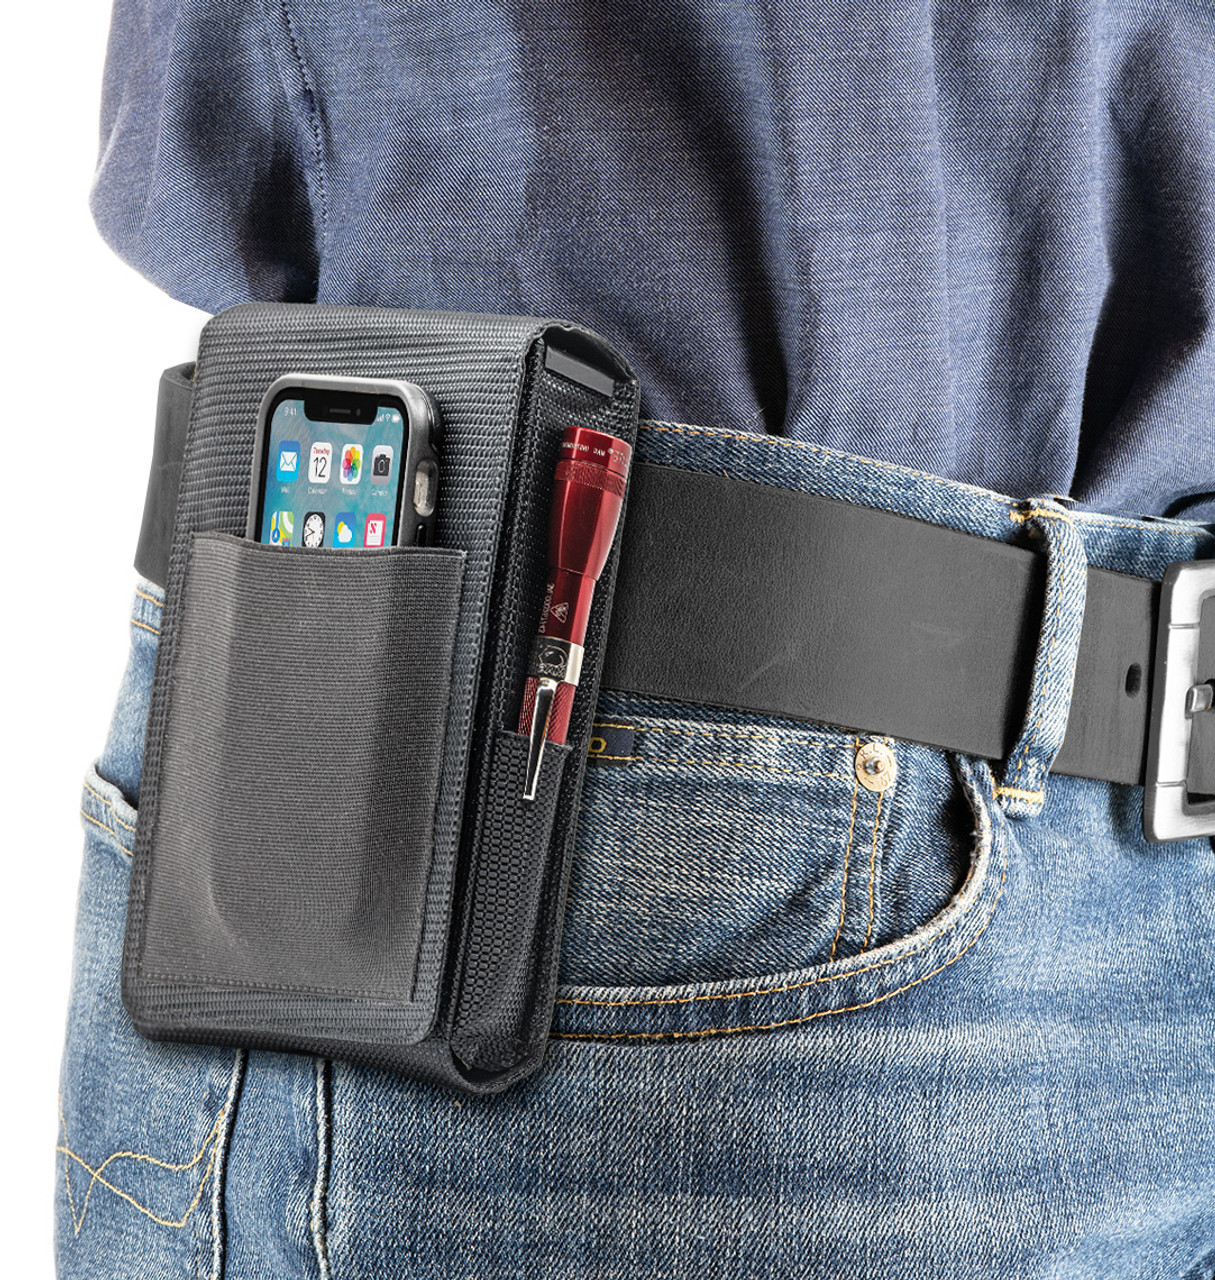 The Ruger Security 9 Compact Perfect Holster